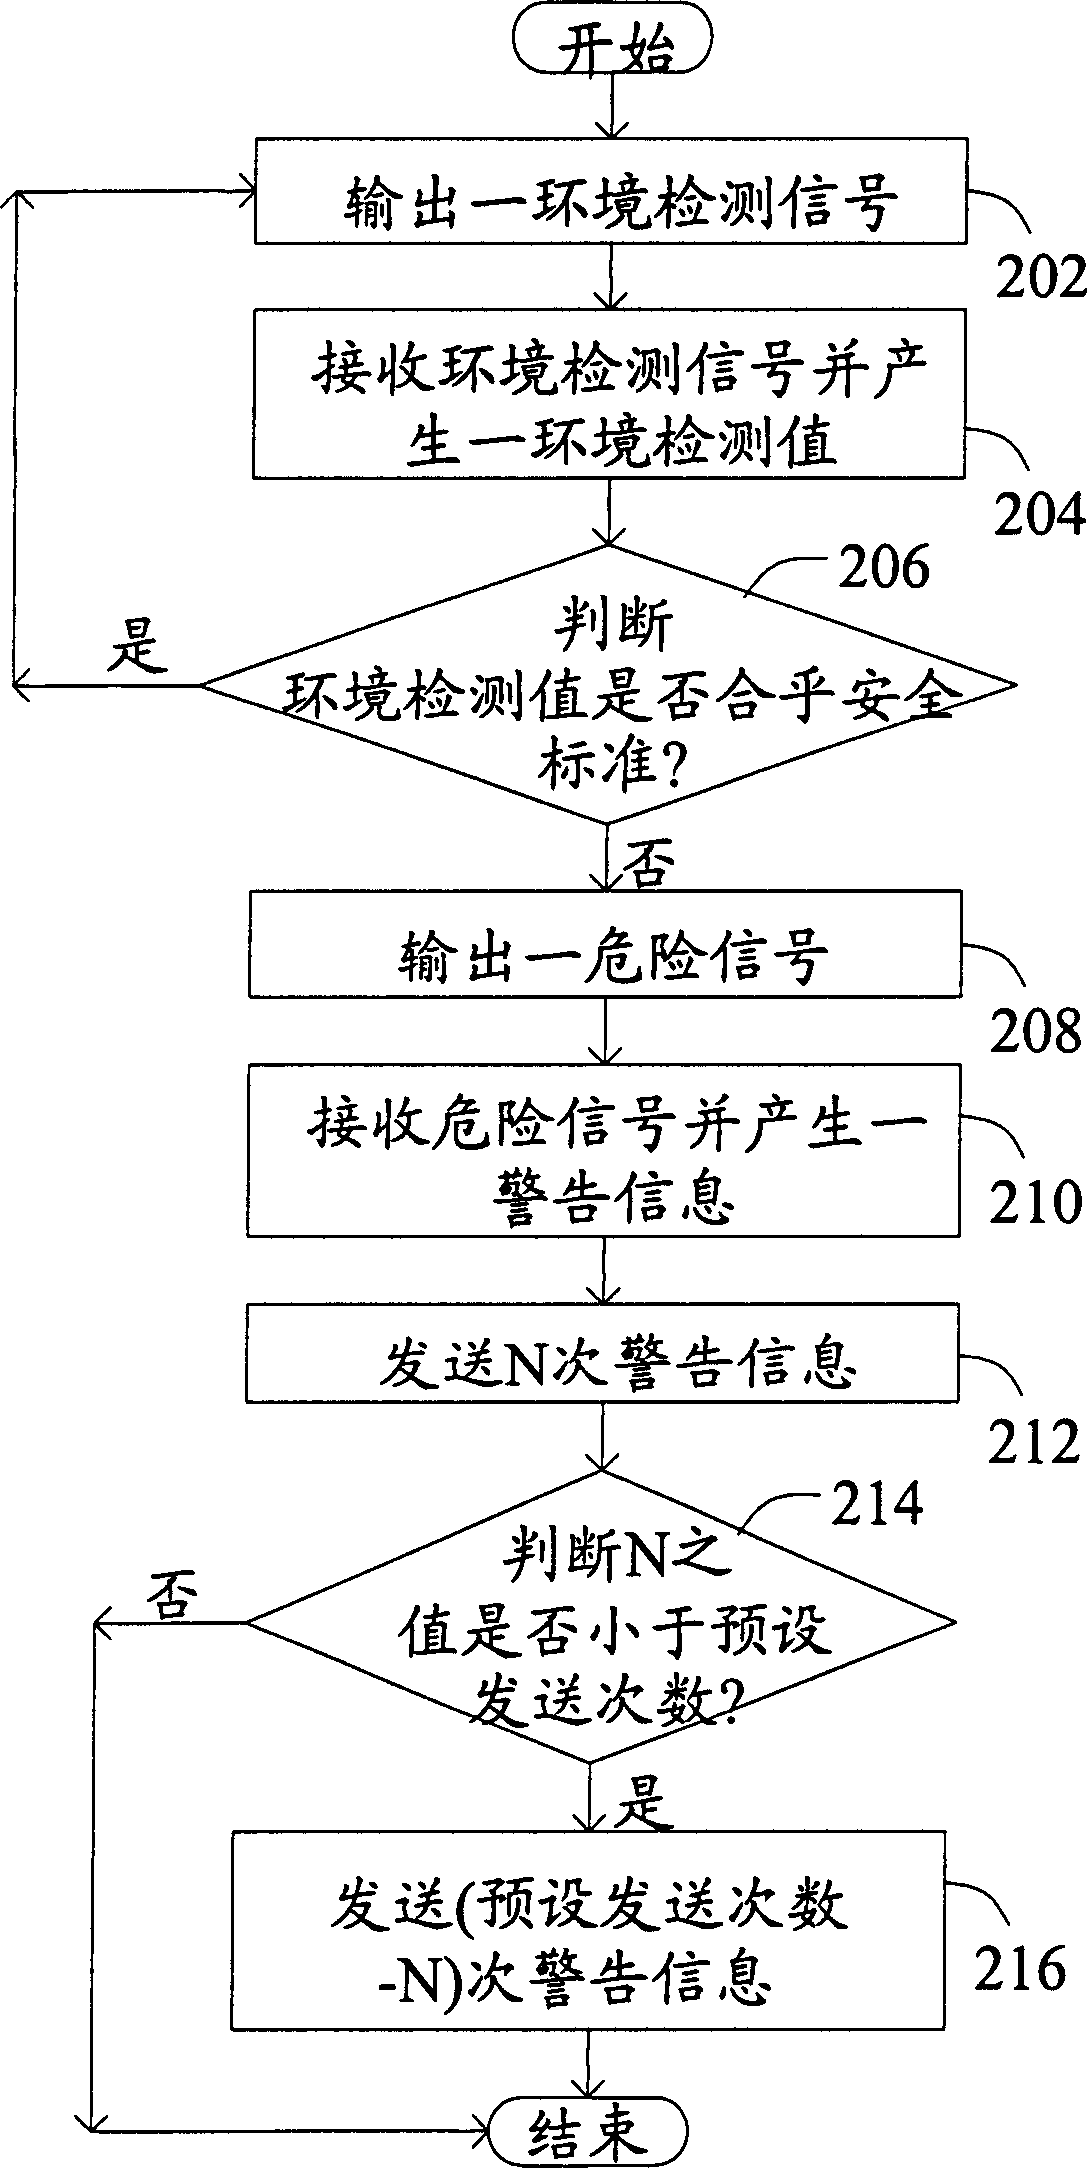 Environment detecting warning system and method